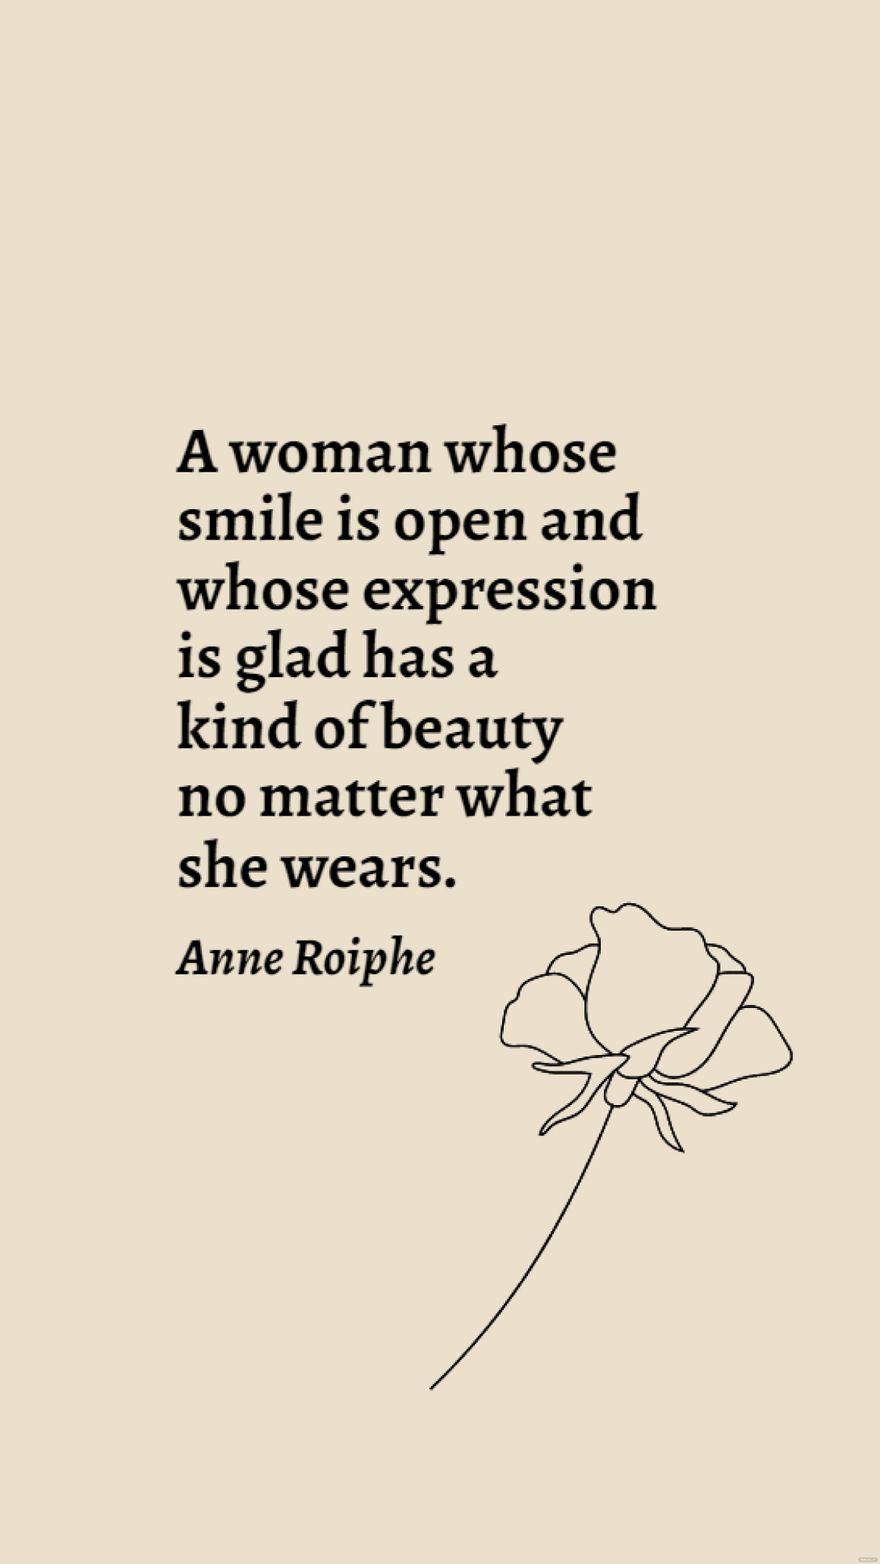 Anne Roiphe - A woman whose smile is open and whose expression is glad has a kind of beauty no matter what she wears.